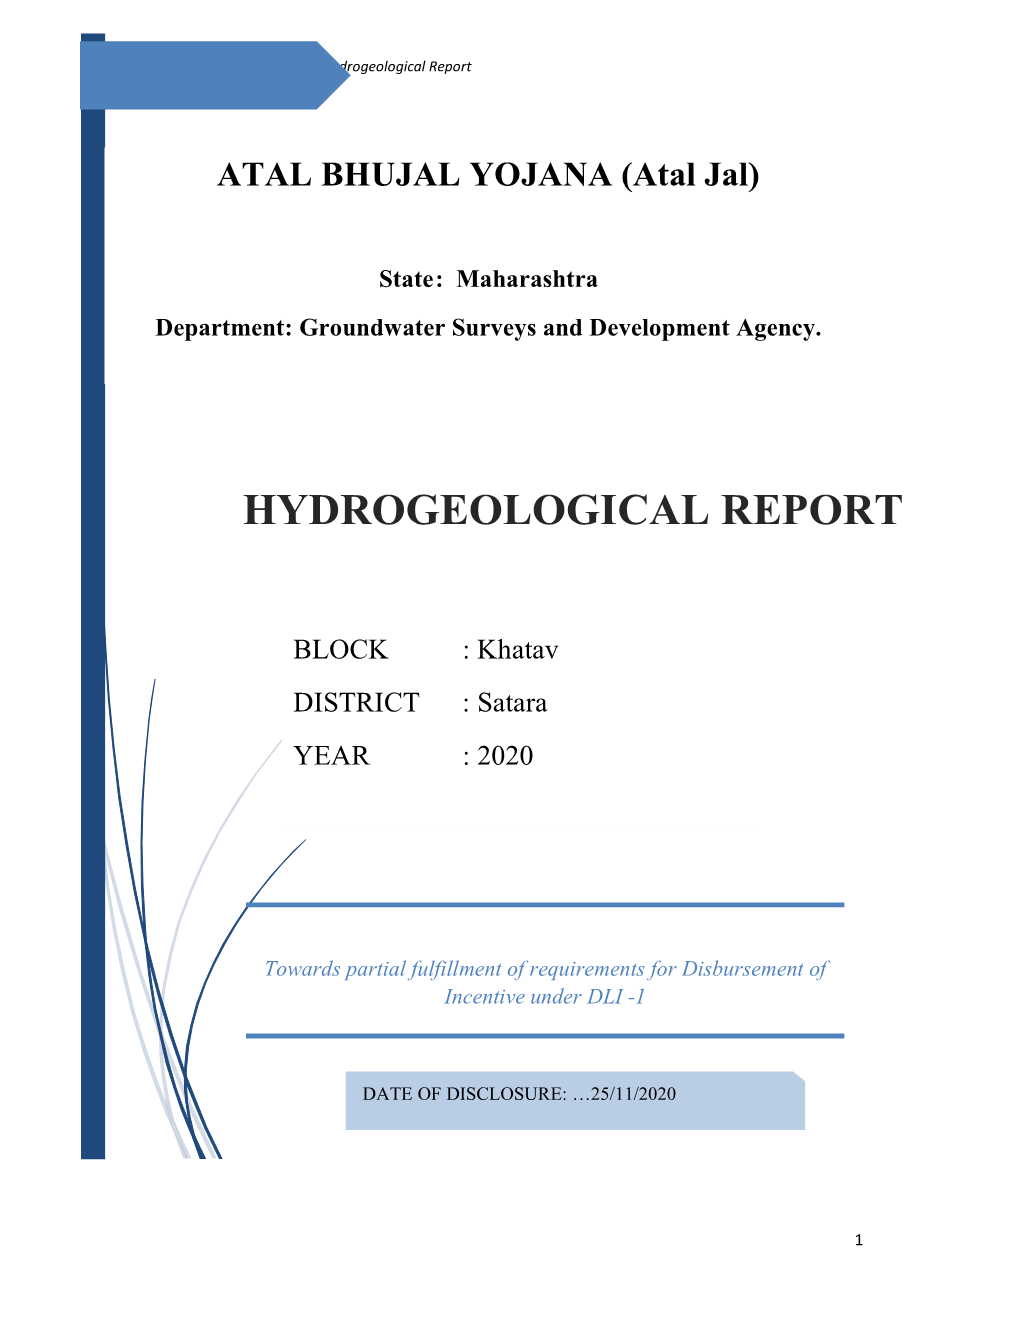 Atal Bhujal Hydrogeological Report